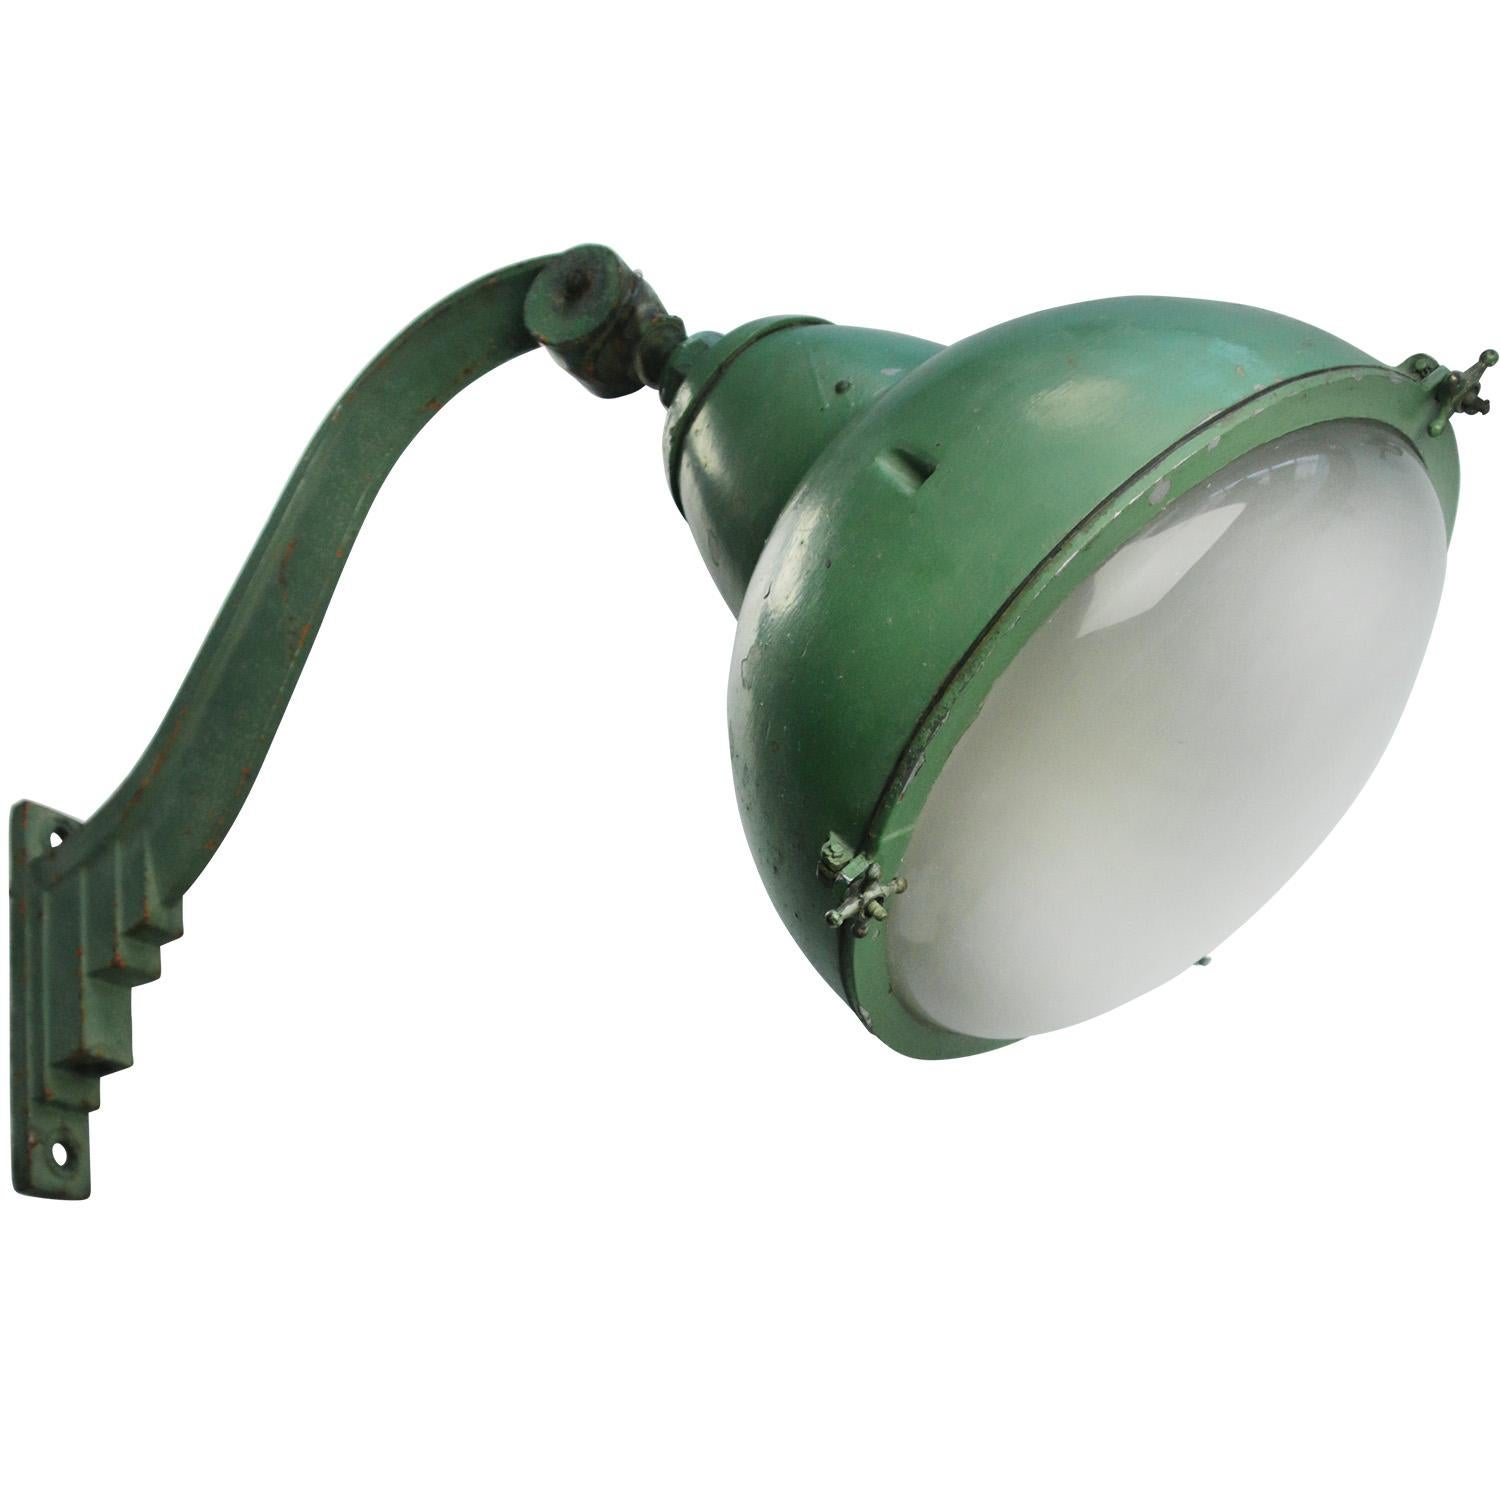 Green vintage French cast iron streetlight by Sammode, France
Metal, cast iron base and frosted glass

Size wall mount 25.5 × 6 cm

Shipped in parts, easy to assemble

Weight: 15.20 kg / 33.5 lb

Priced per individual item. All lamps have